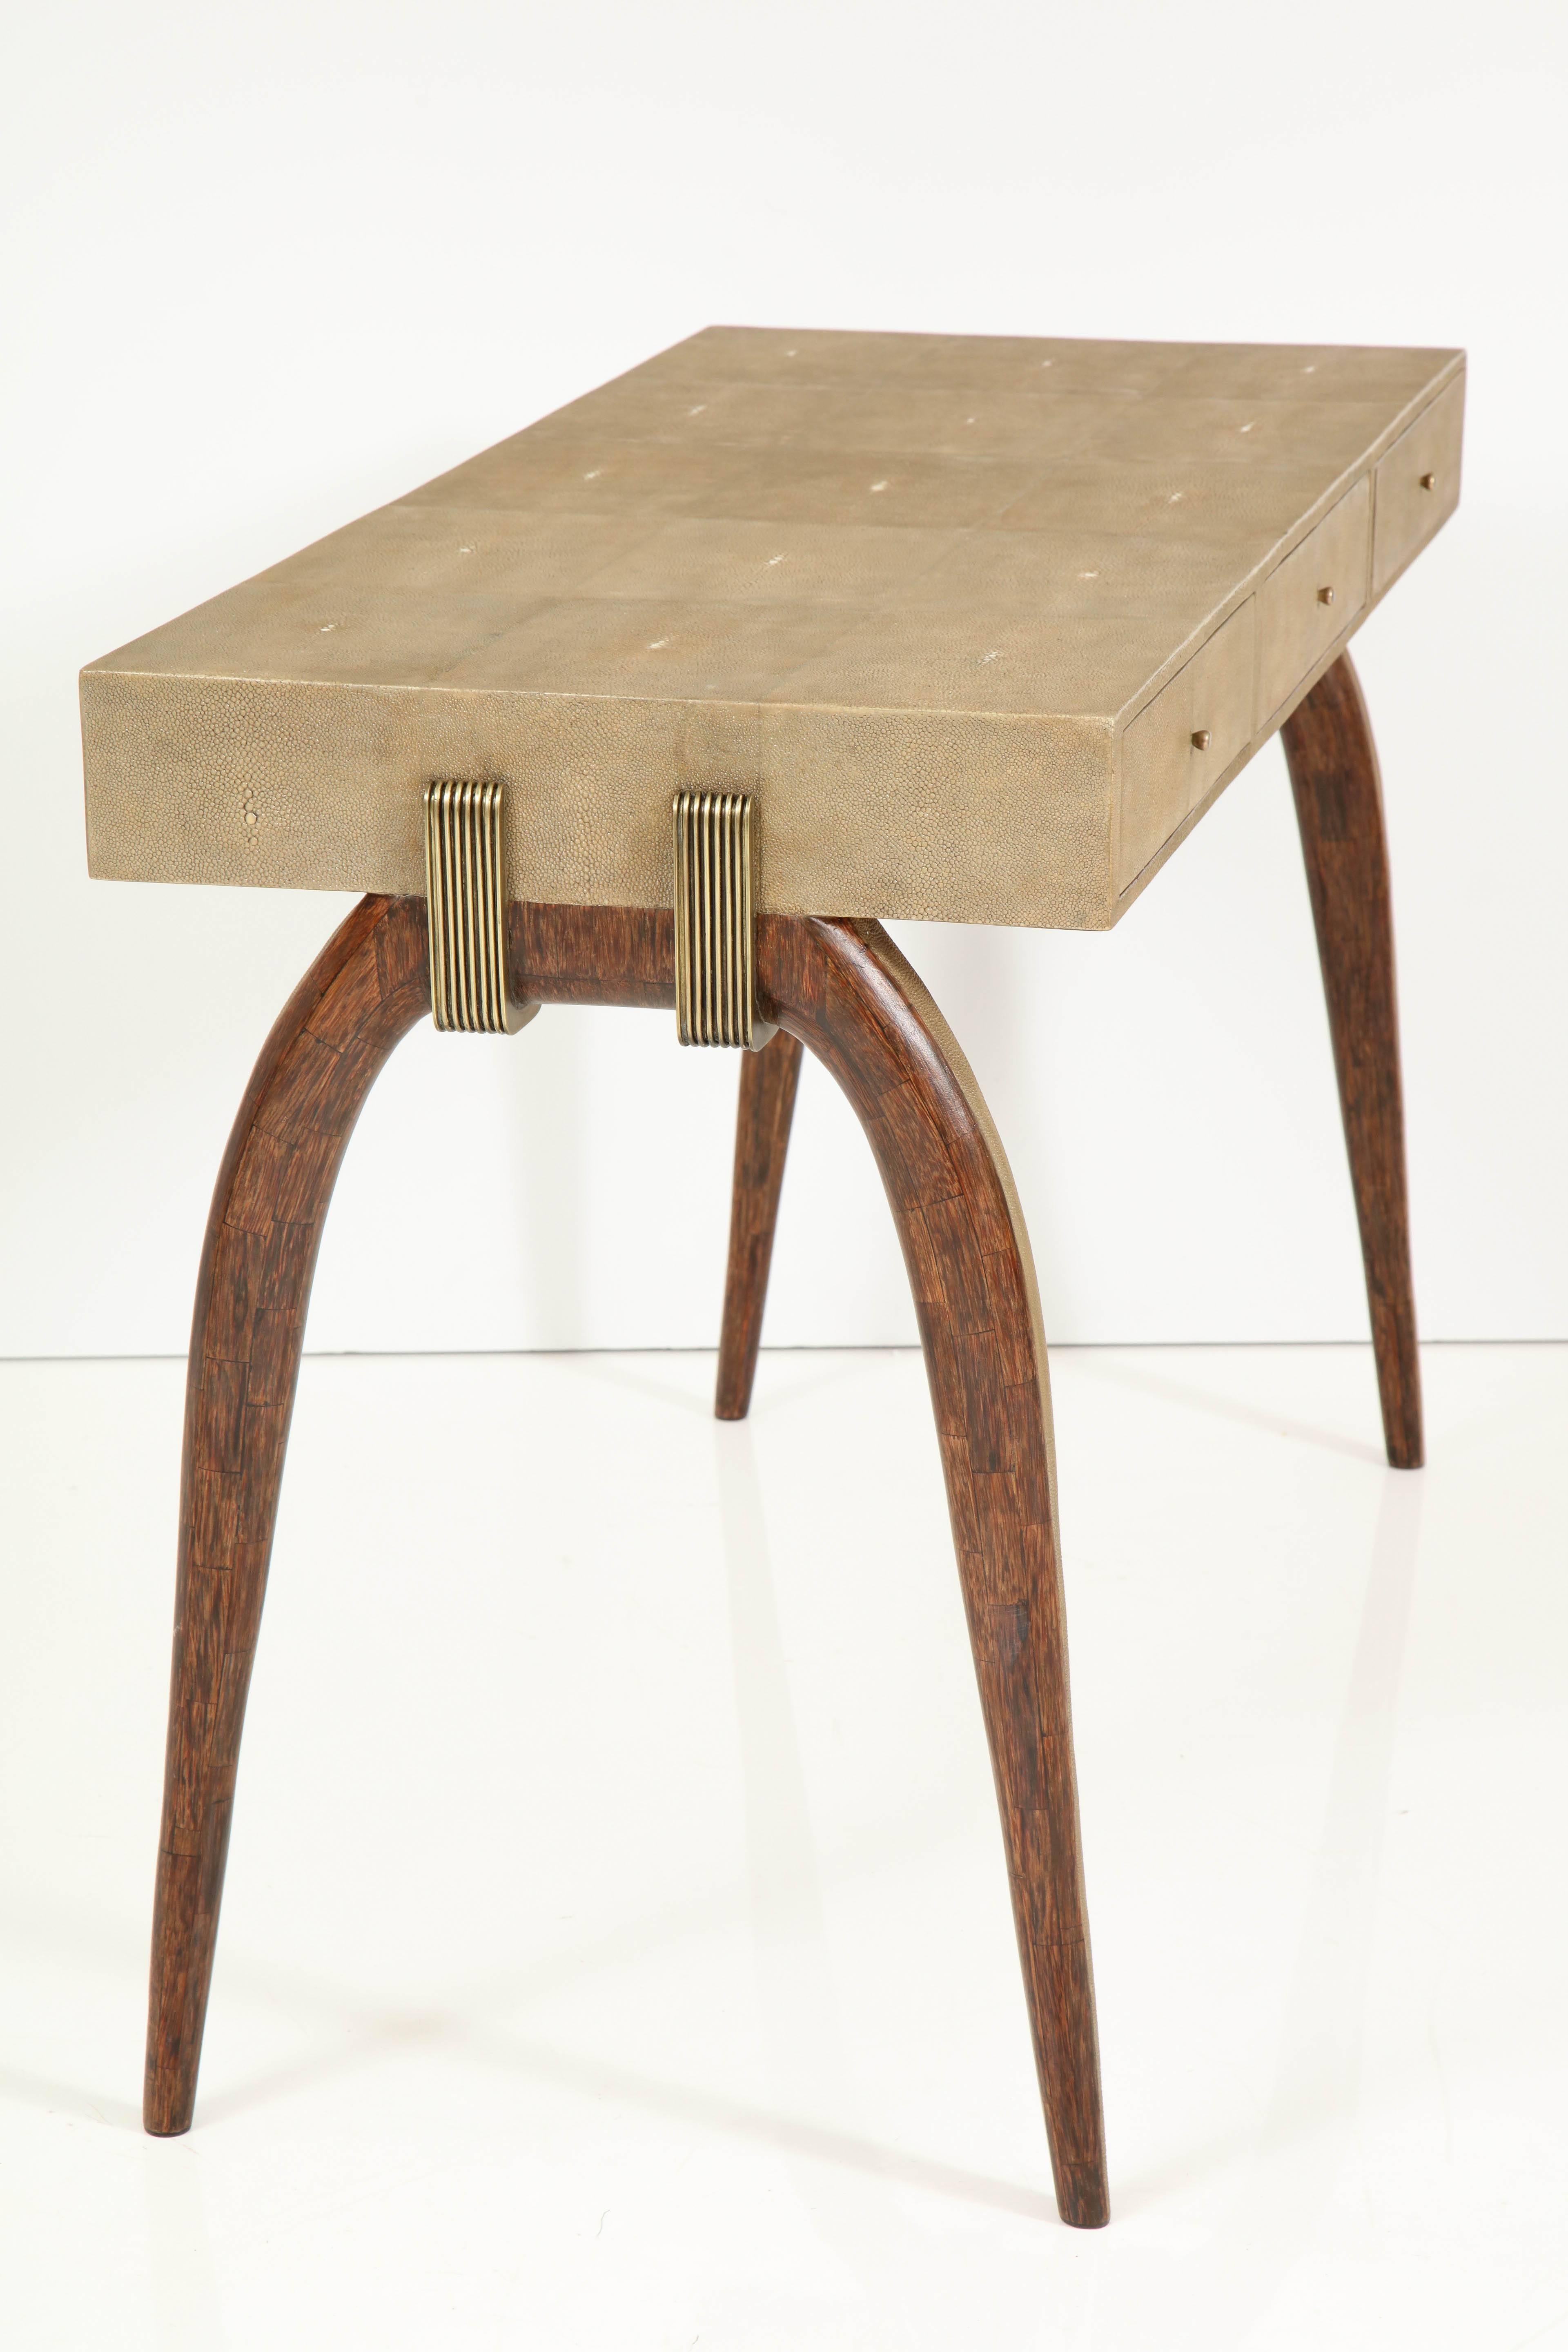 Hand-Crafted Desk, Shagreen with Brass and Palm Wood Details, Contemporary, Khaki Color